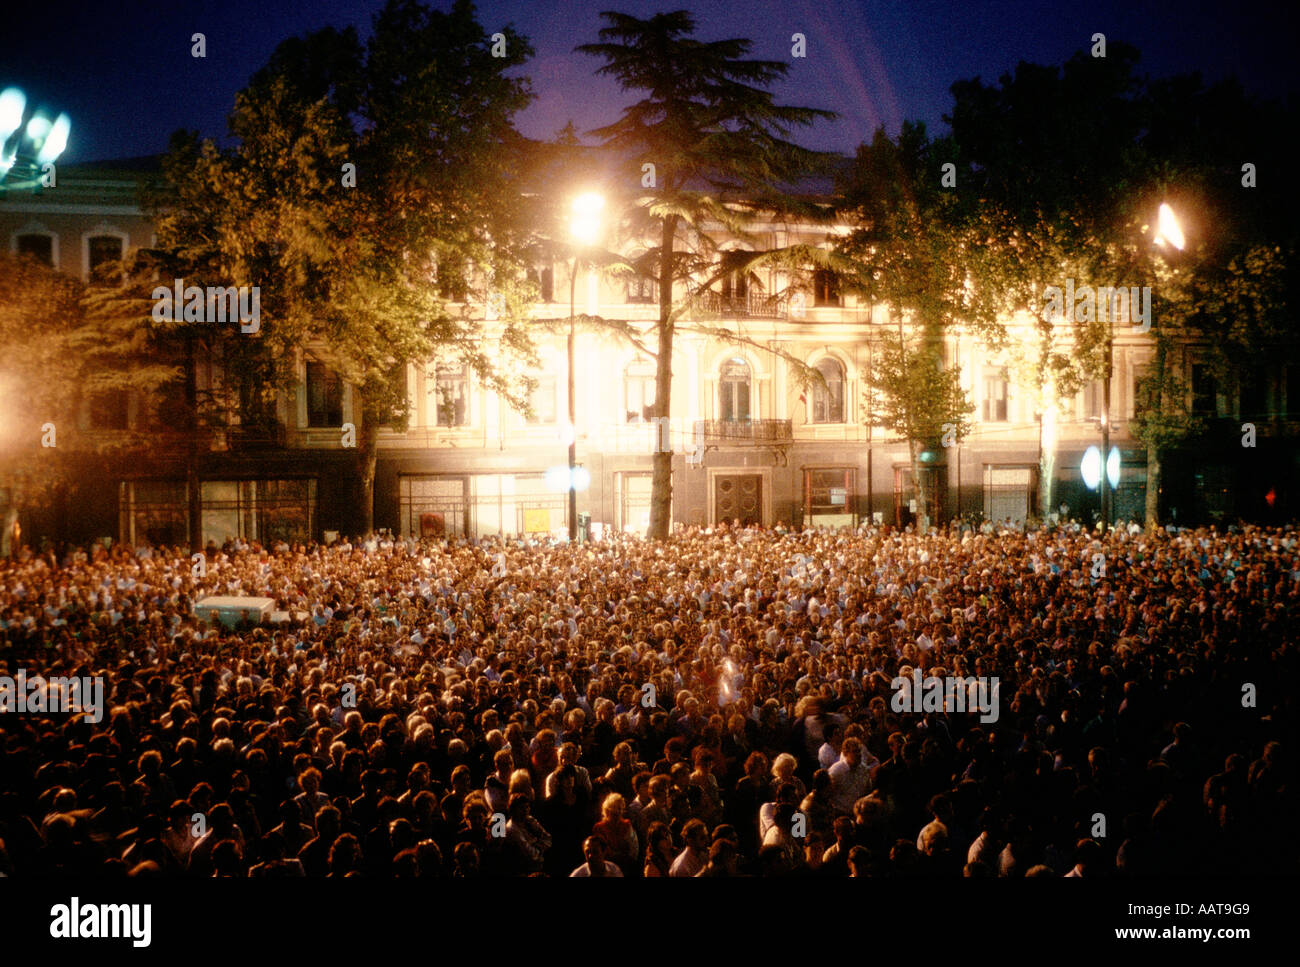 GEORGIA OCT 1990 RALLY GATHERING IN SQUARE IN SUPPORT OF THE ROUND TABLE MEETING EVENING IN TBILISI GEORGIA Stock Photo